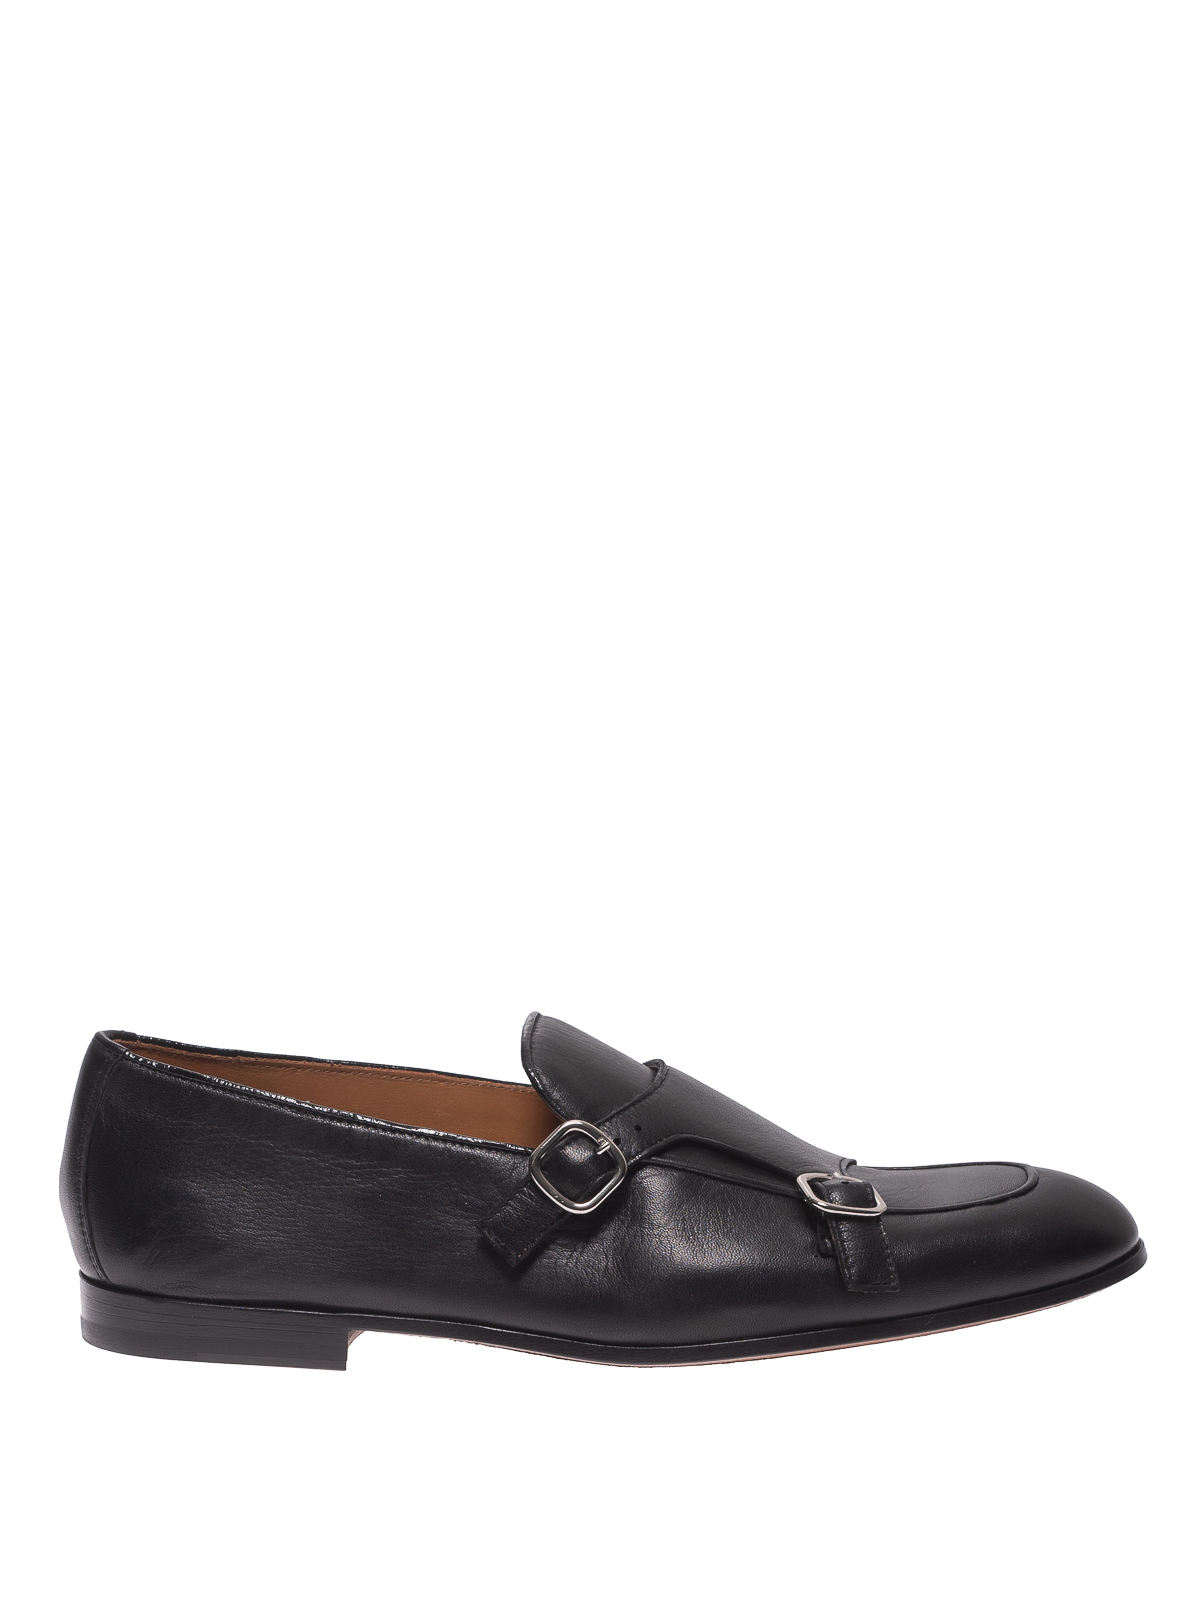 Doucal's - Black leather monk straps - Loafers & Slippers ...